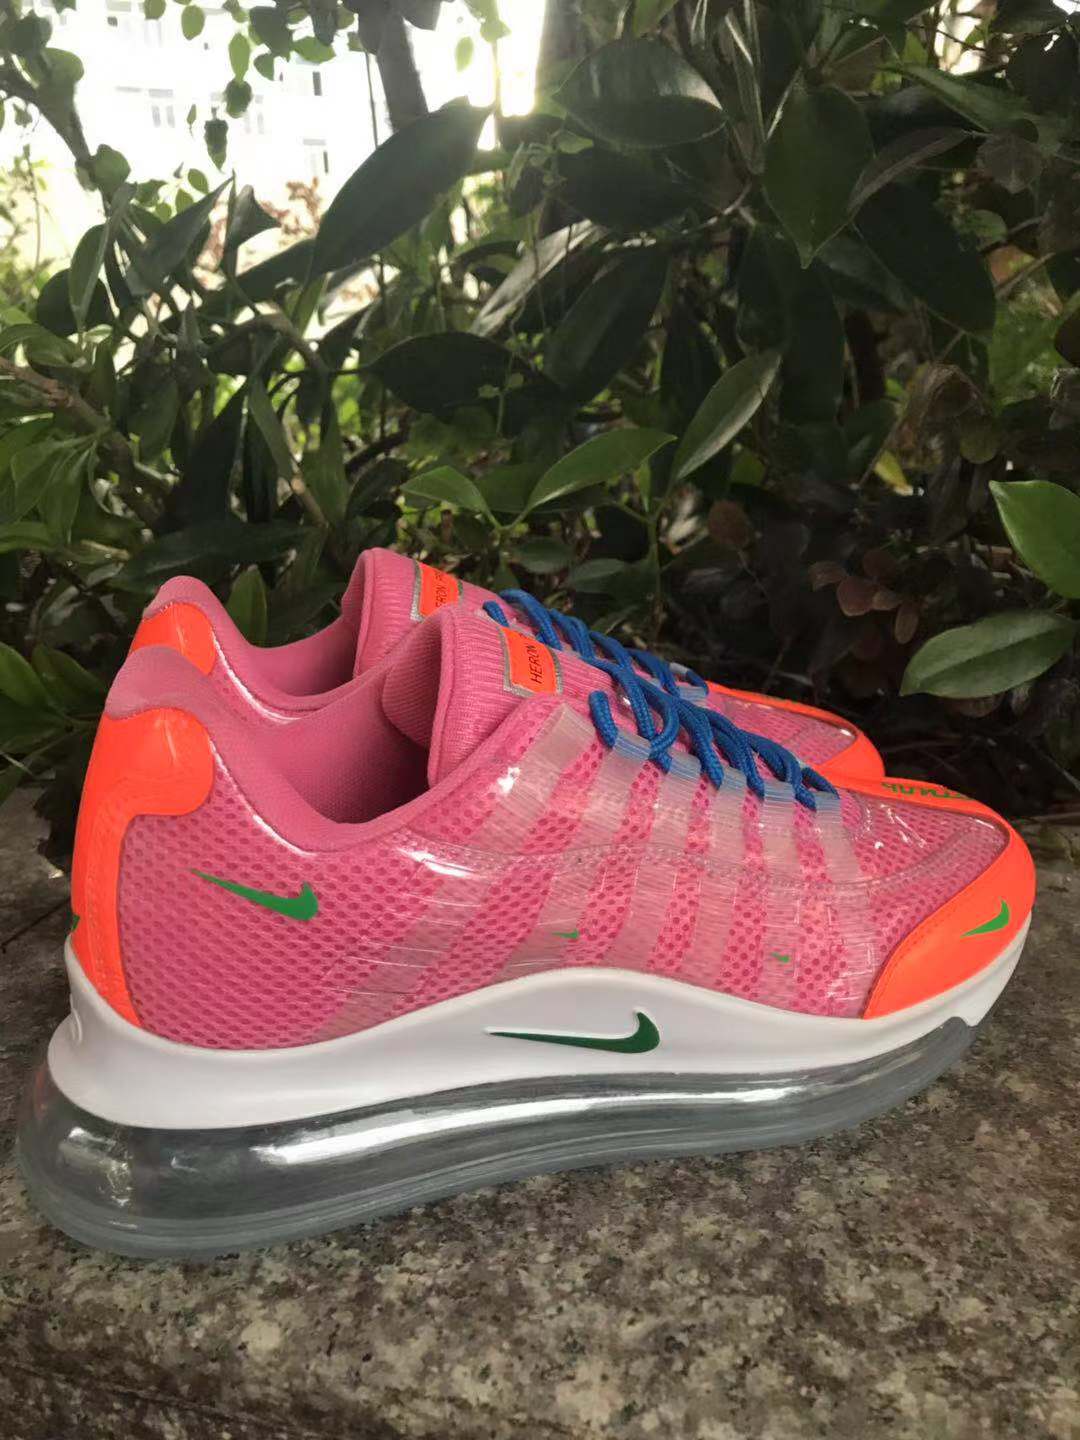 New Women Nike Air Max 720 95 Orange Pink Blue Shoes - Click Image to Close